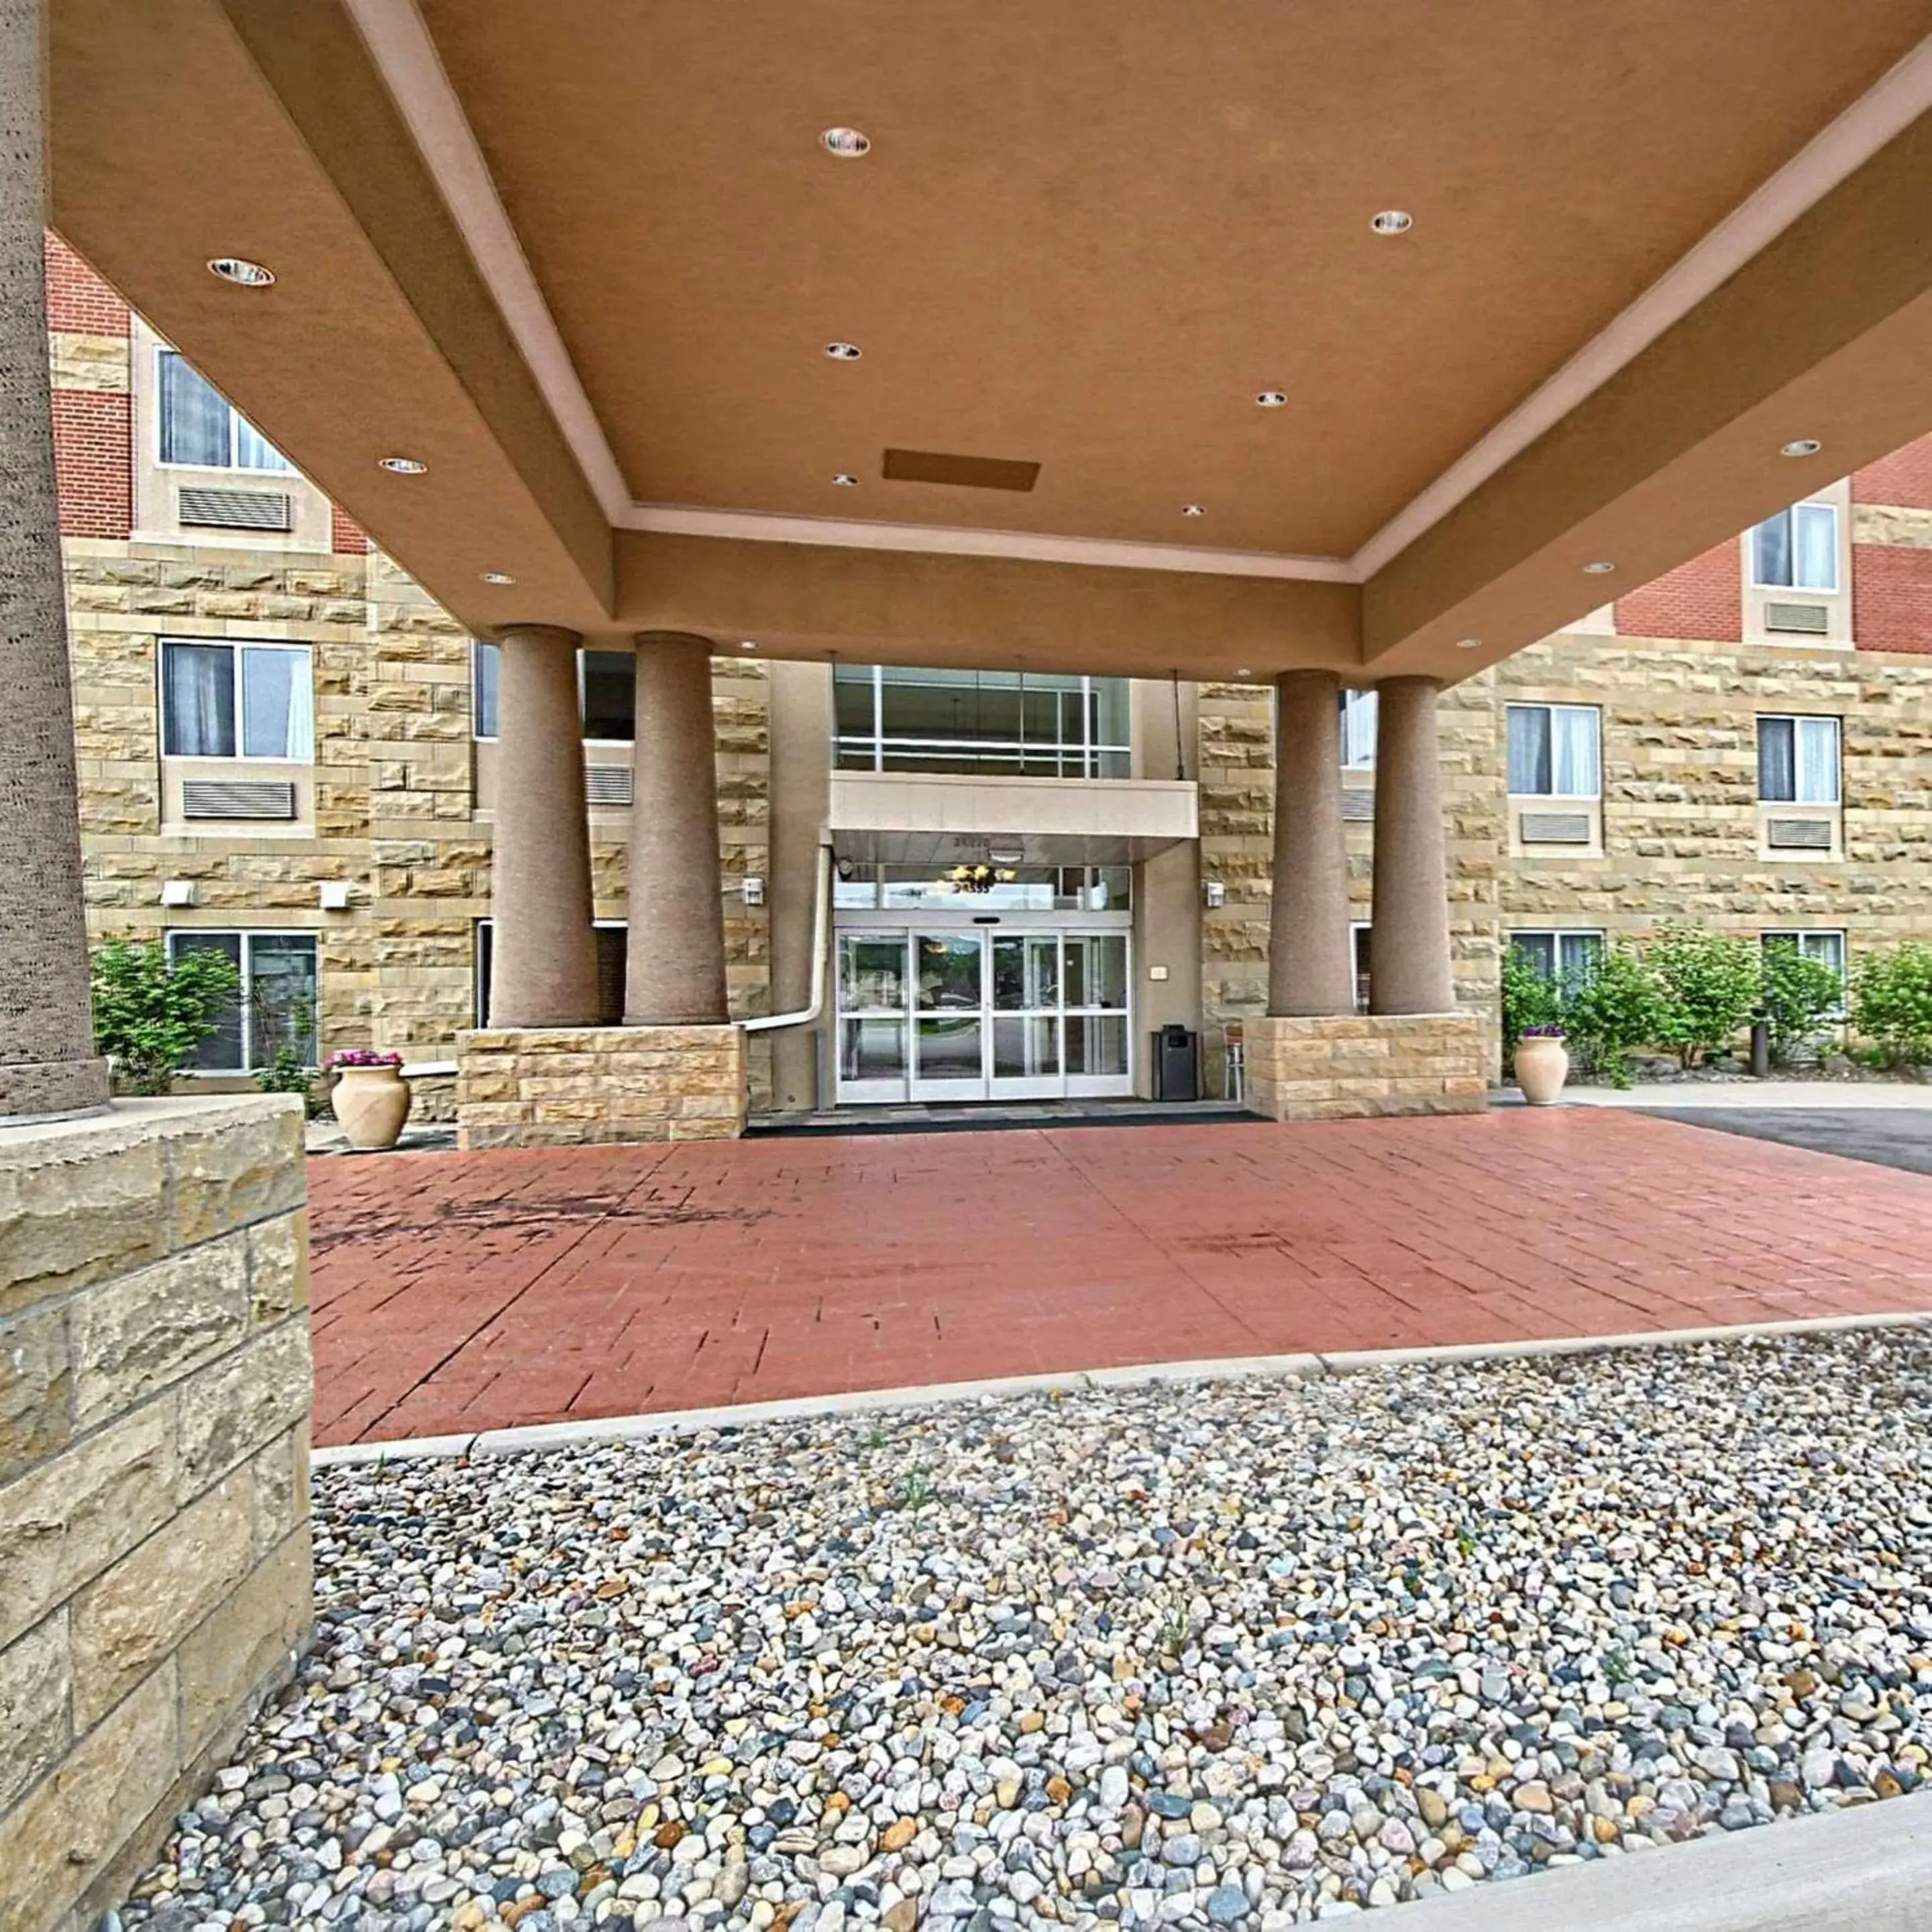 Property building in Country Inn & Suites by Radisson, Dearborn, MI